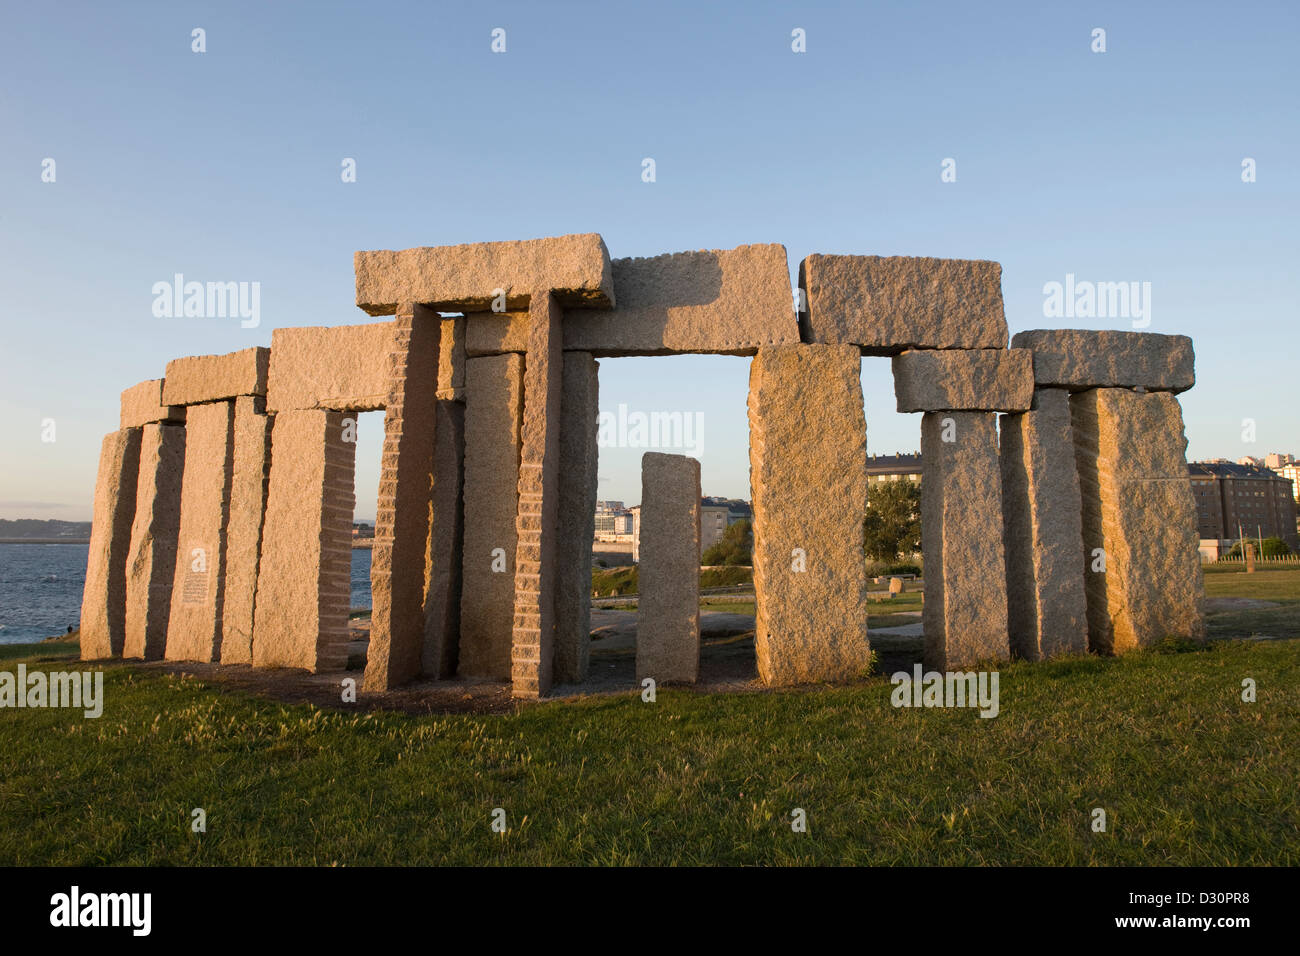 MONUMENT TO PEOPLE EXECUTED IN SPANISH CIVIL WAR PASEO DOS MENHIRES SCULPTURE PARK LA CORUNA GALICIA SPAIN Stock Photo